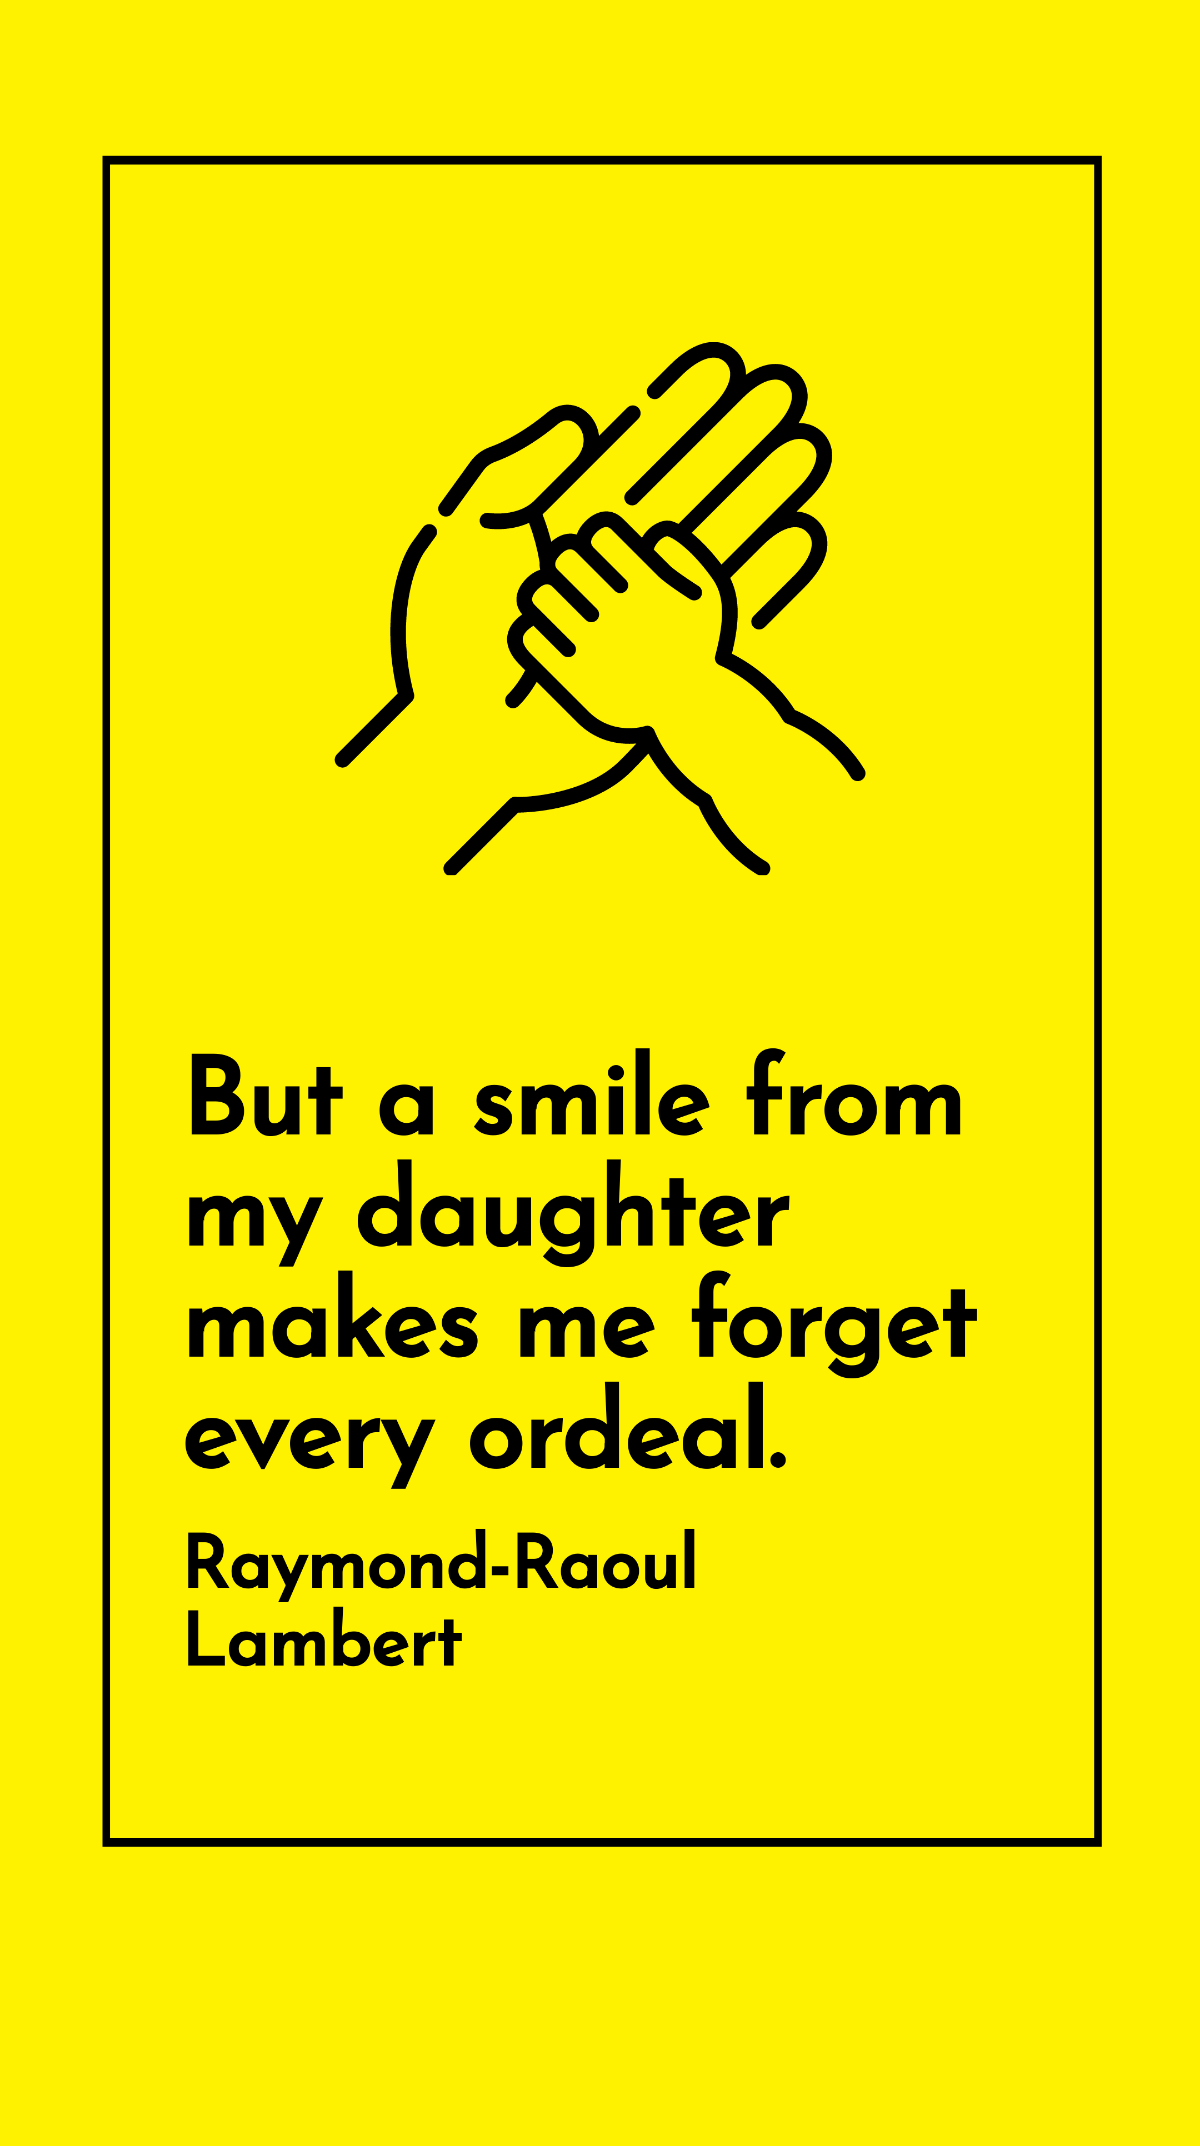 Raymond-Raoul Lambert - But a smile from my daughter makes me forget every ordeal. Template